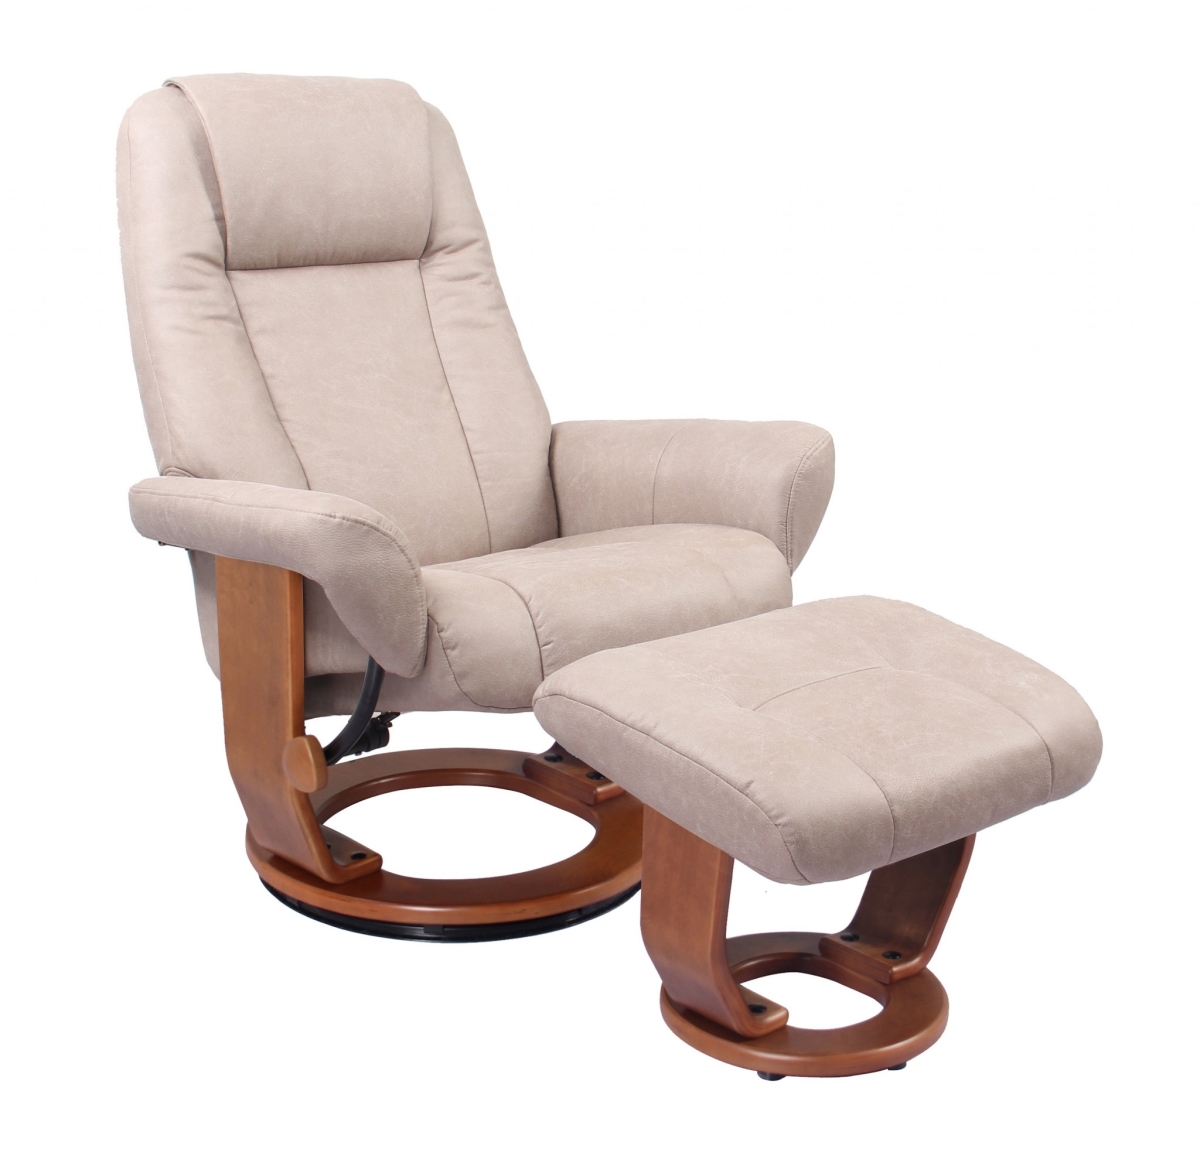 Home Roots 383056 Contemporary Swivel Recliner & Ottoman Set, Sandy Beige